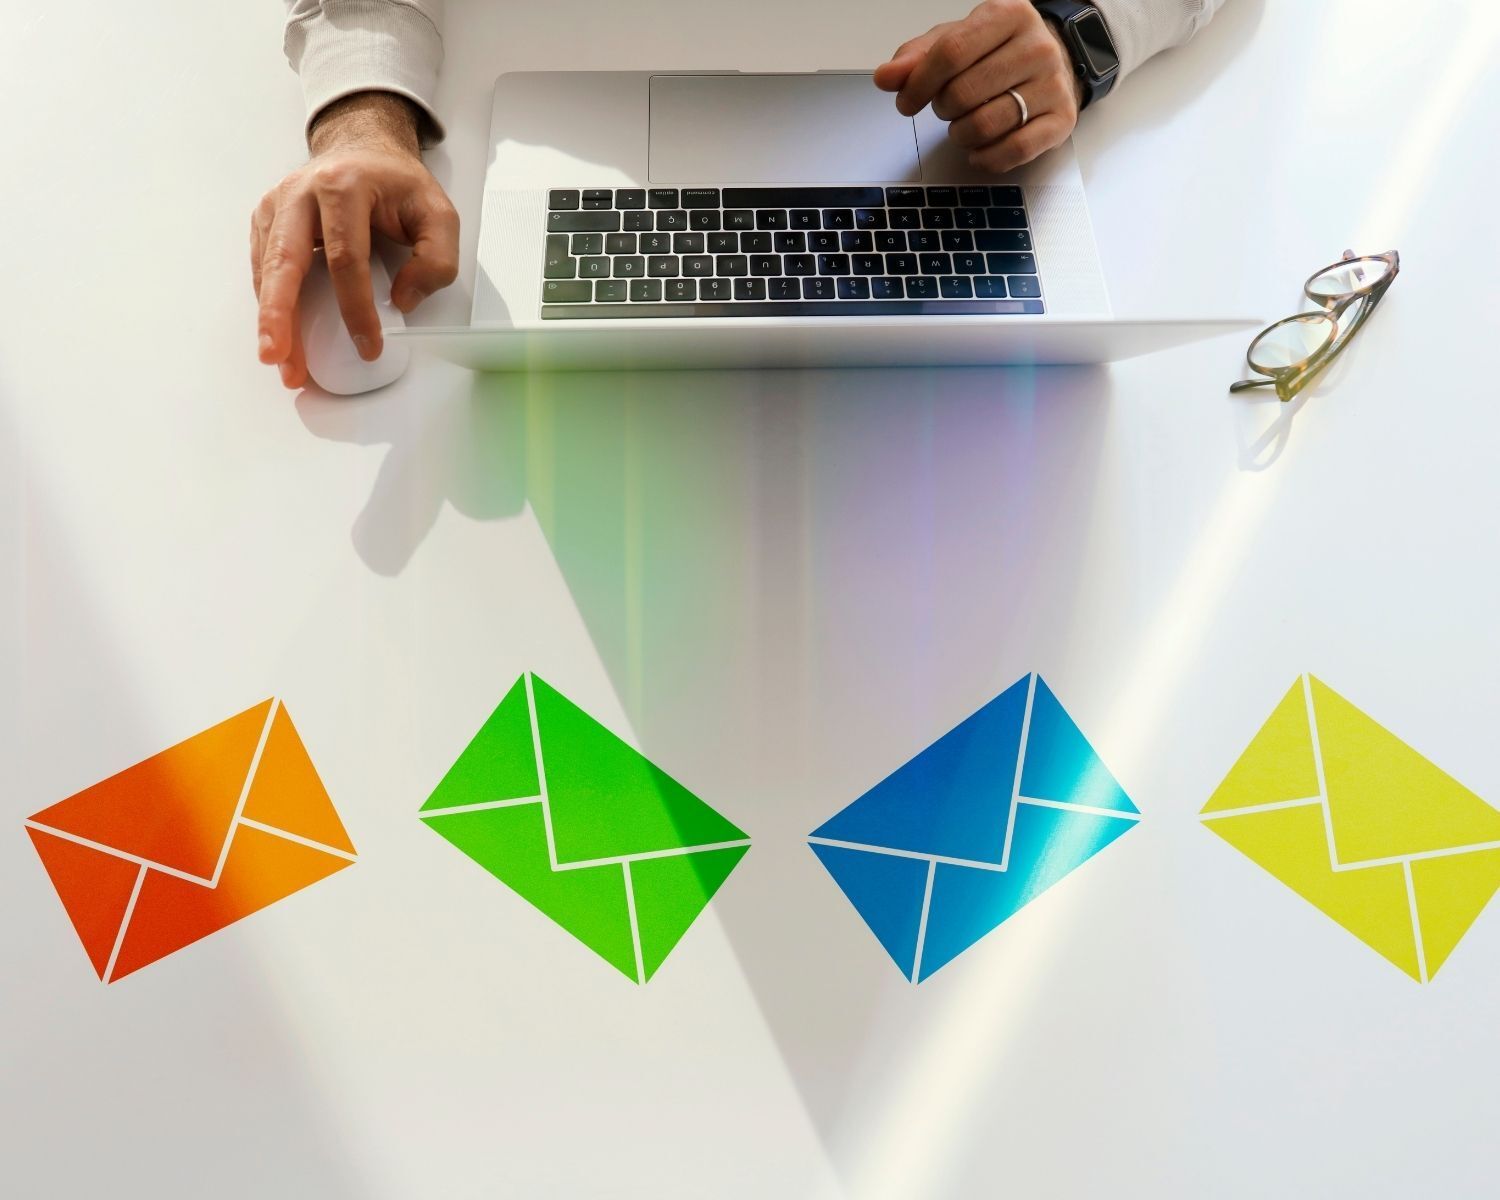 envelopes on table - Spam Trap Email Addresses and How to Avoid Them